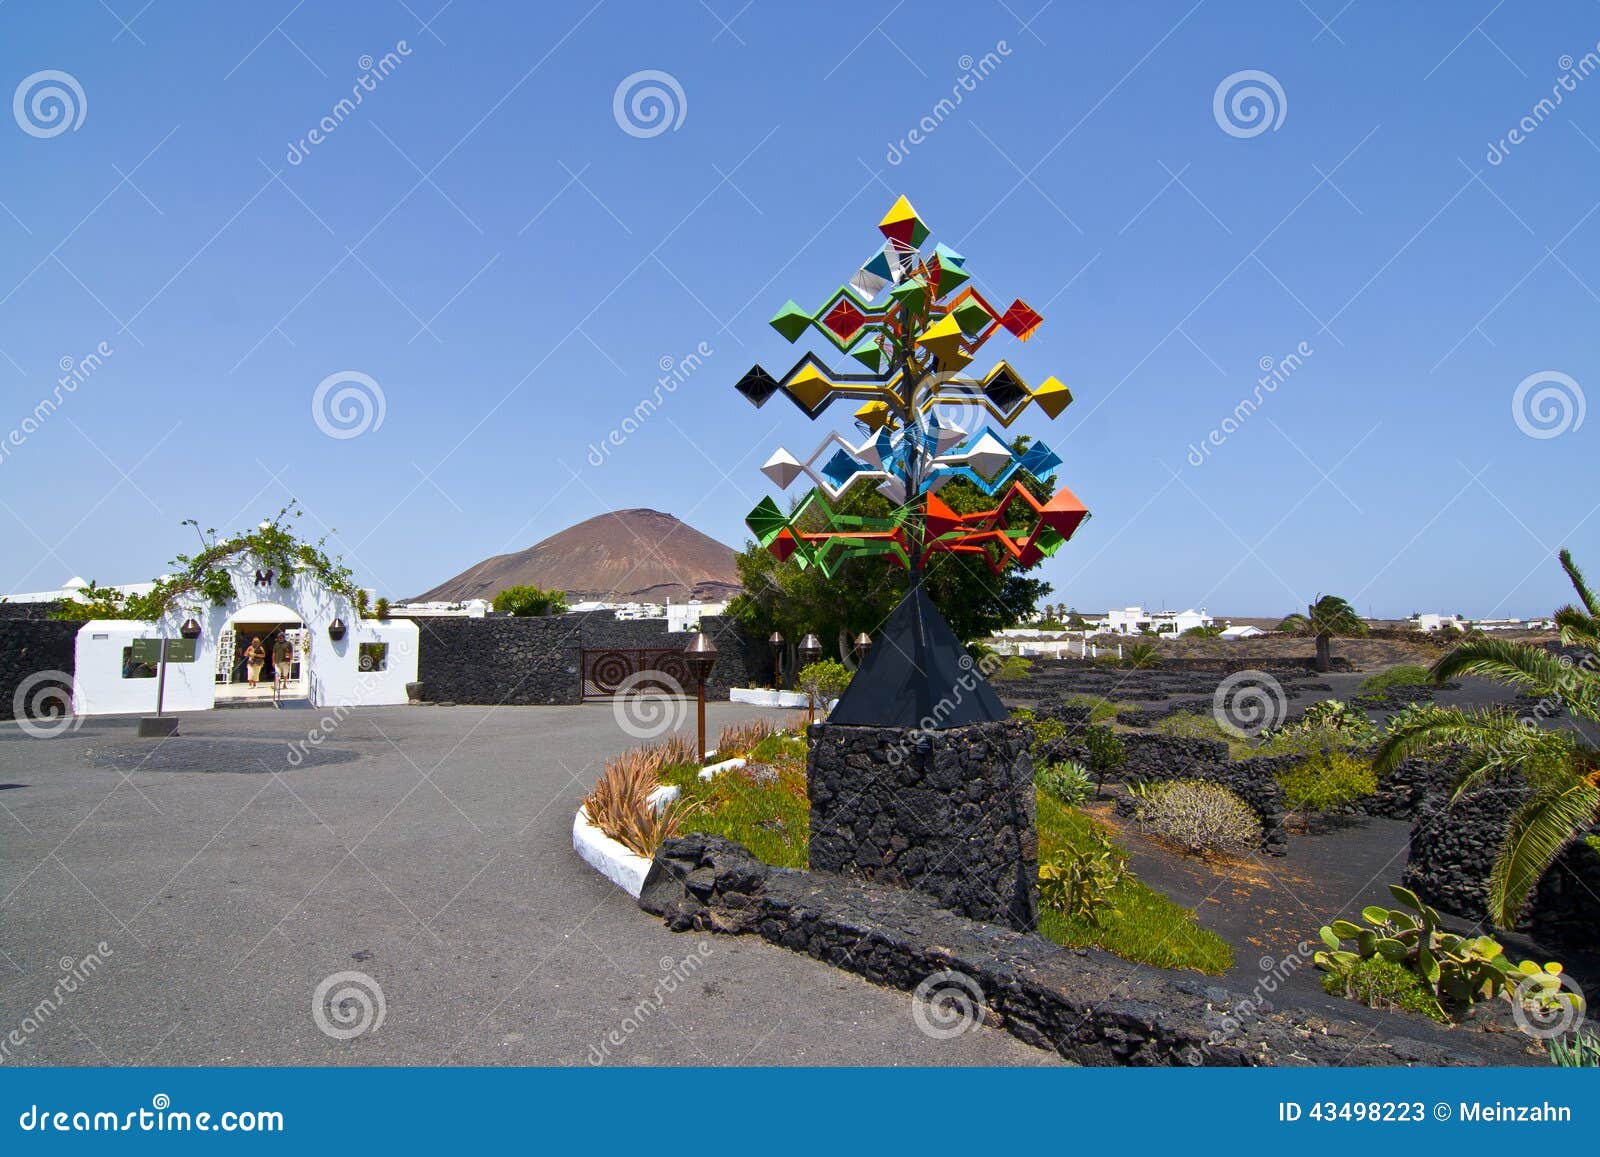 mobile sculpture in front of the manrique foundation in lanzarote